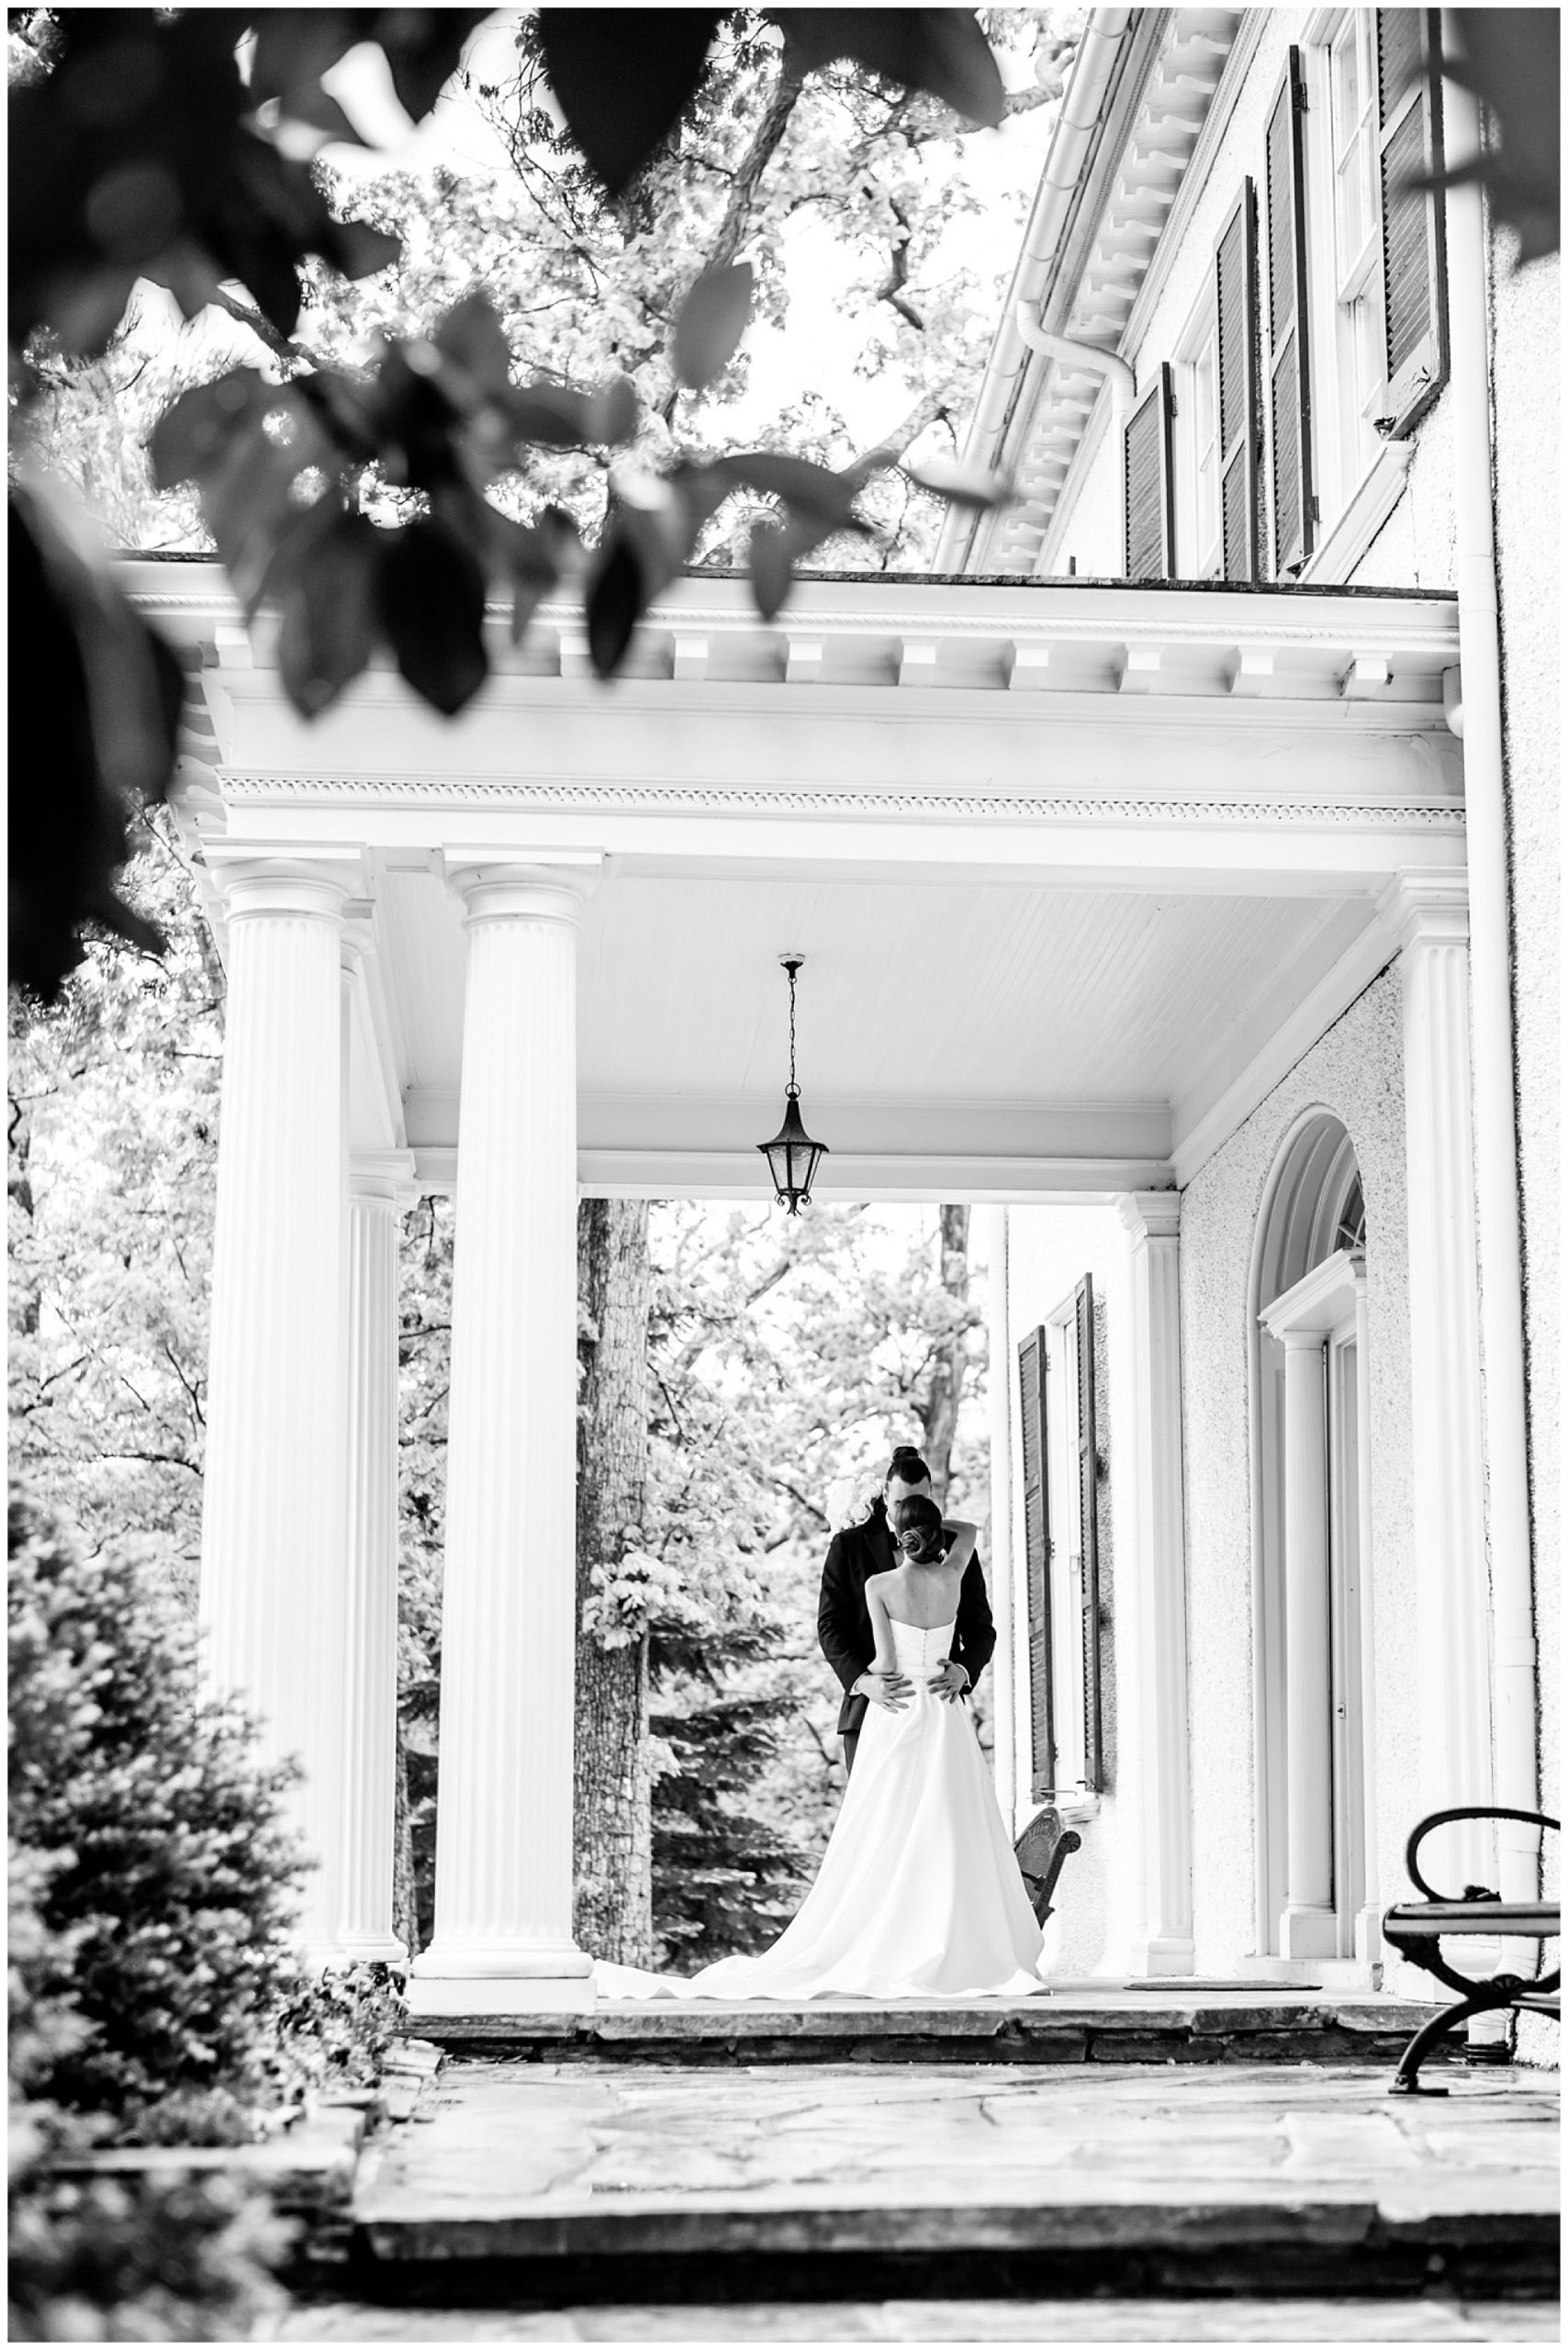 classic Rust Manor House wedding, sprig wedding, black and white aesthetic, classic wedding aesthetic, White Pumpkin Weddings City Tavern Club wedding, Leesburg wedding, Leesbur bride, manor house wedding, classic DC wedding, northern Virginia wedding venue, classic wedding venue, Washington DC wedding photographer, Rachel E.H. Photography, black and white, bride and groom kissing from behind tree